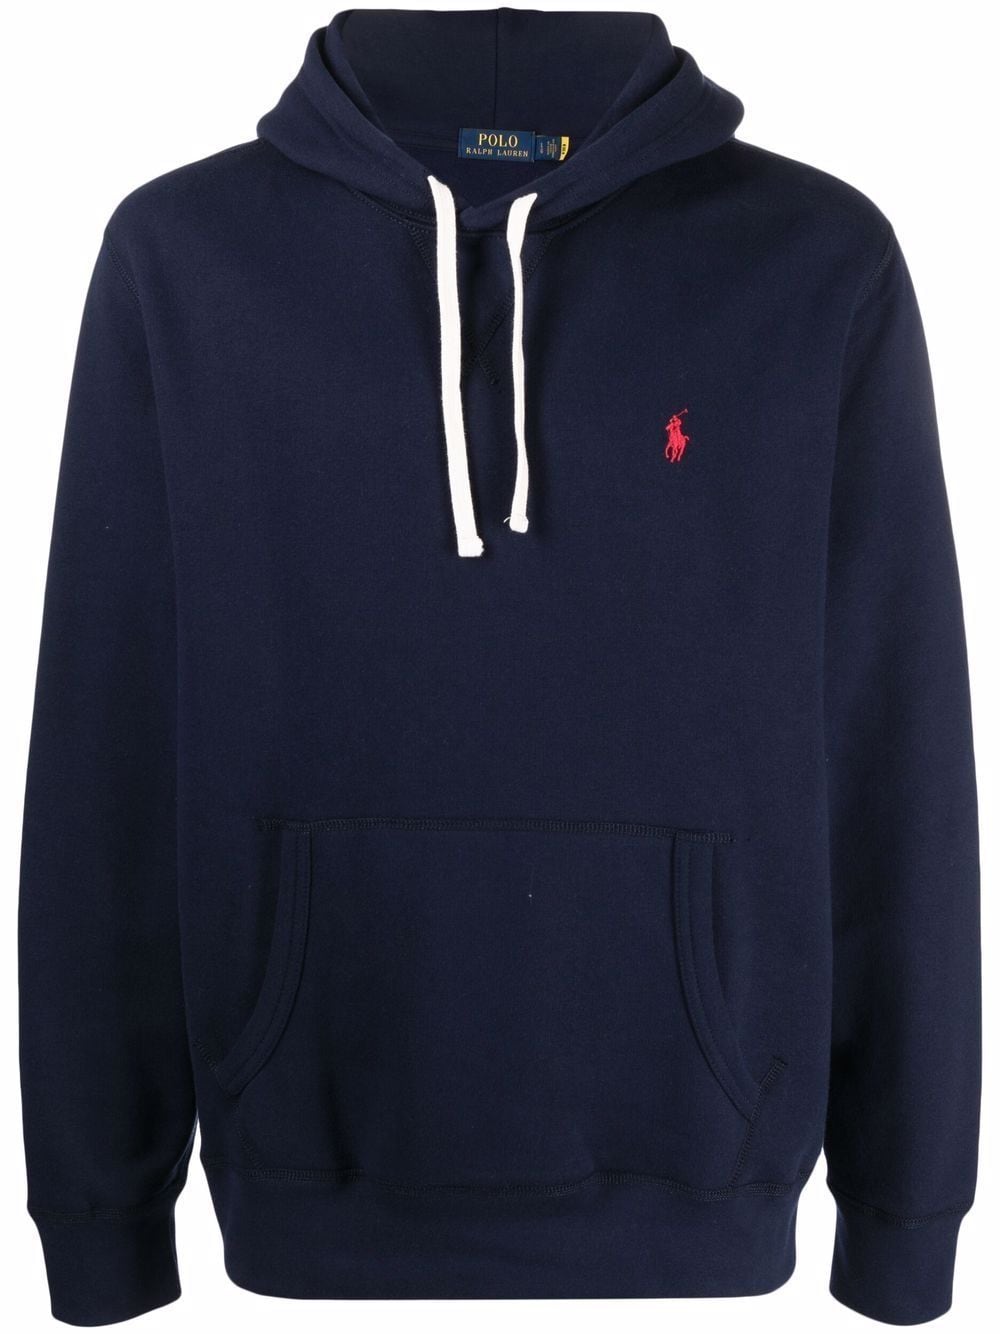 Navy blue cotton-blend embroidered logo hoodie